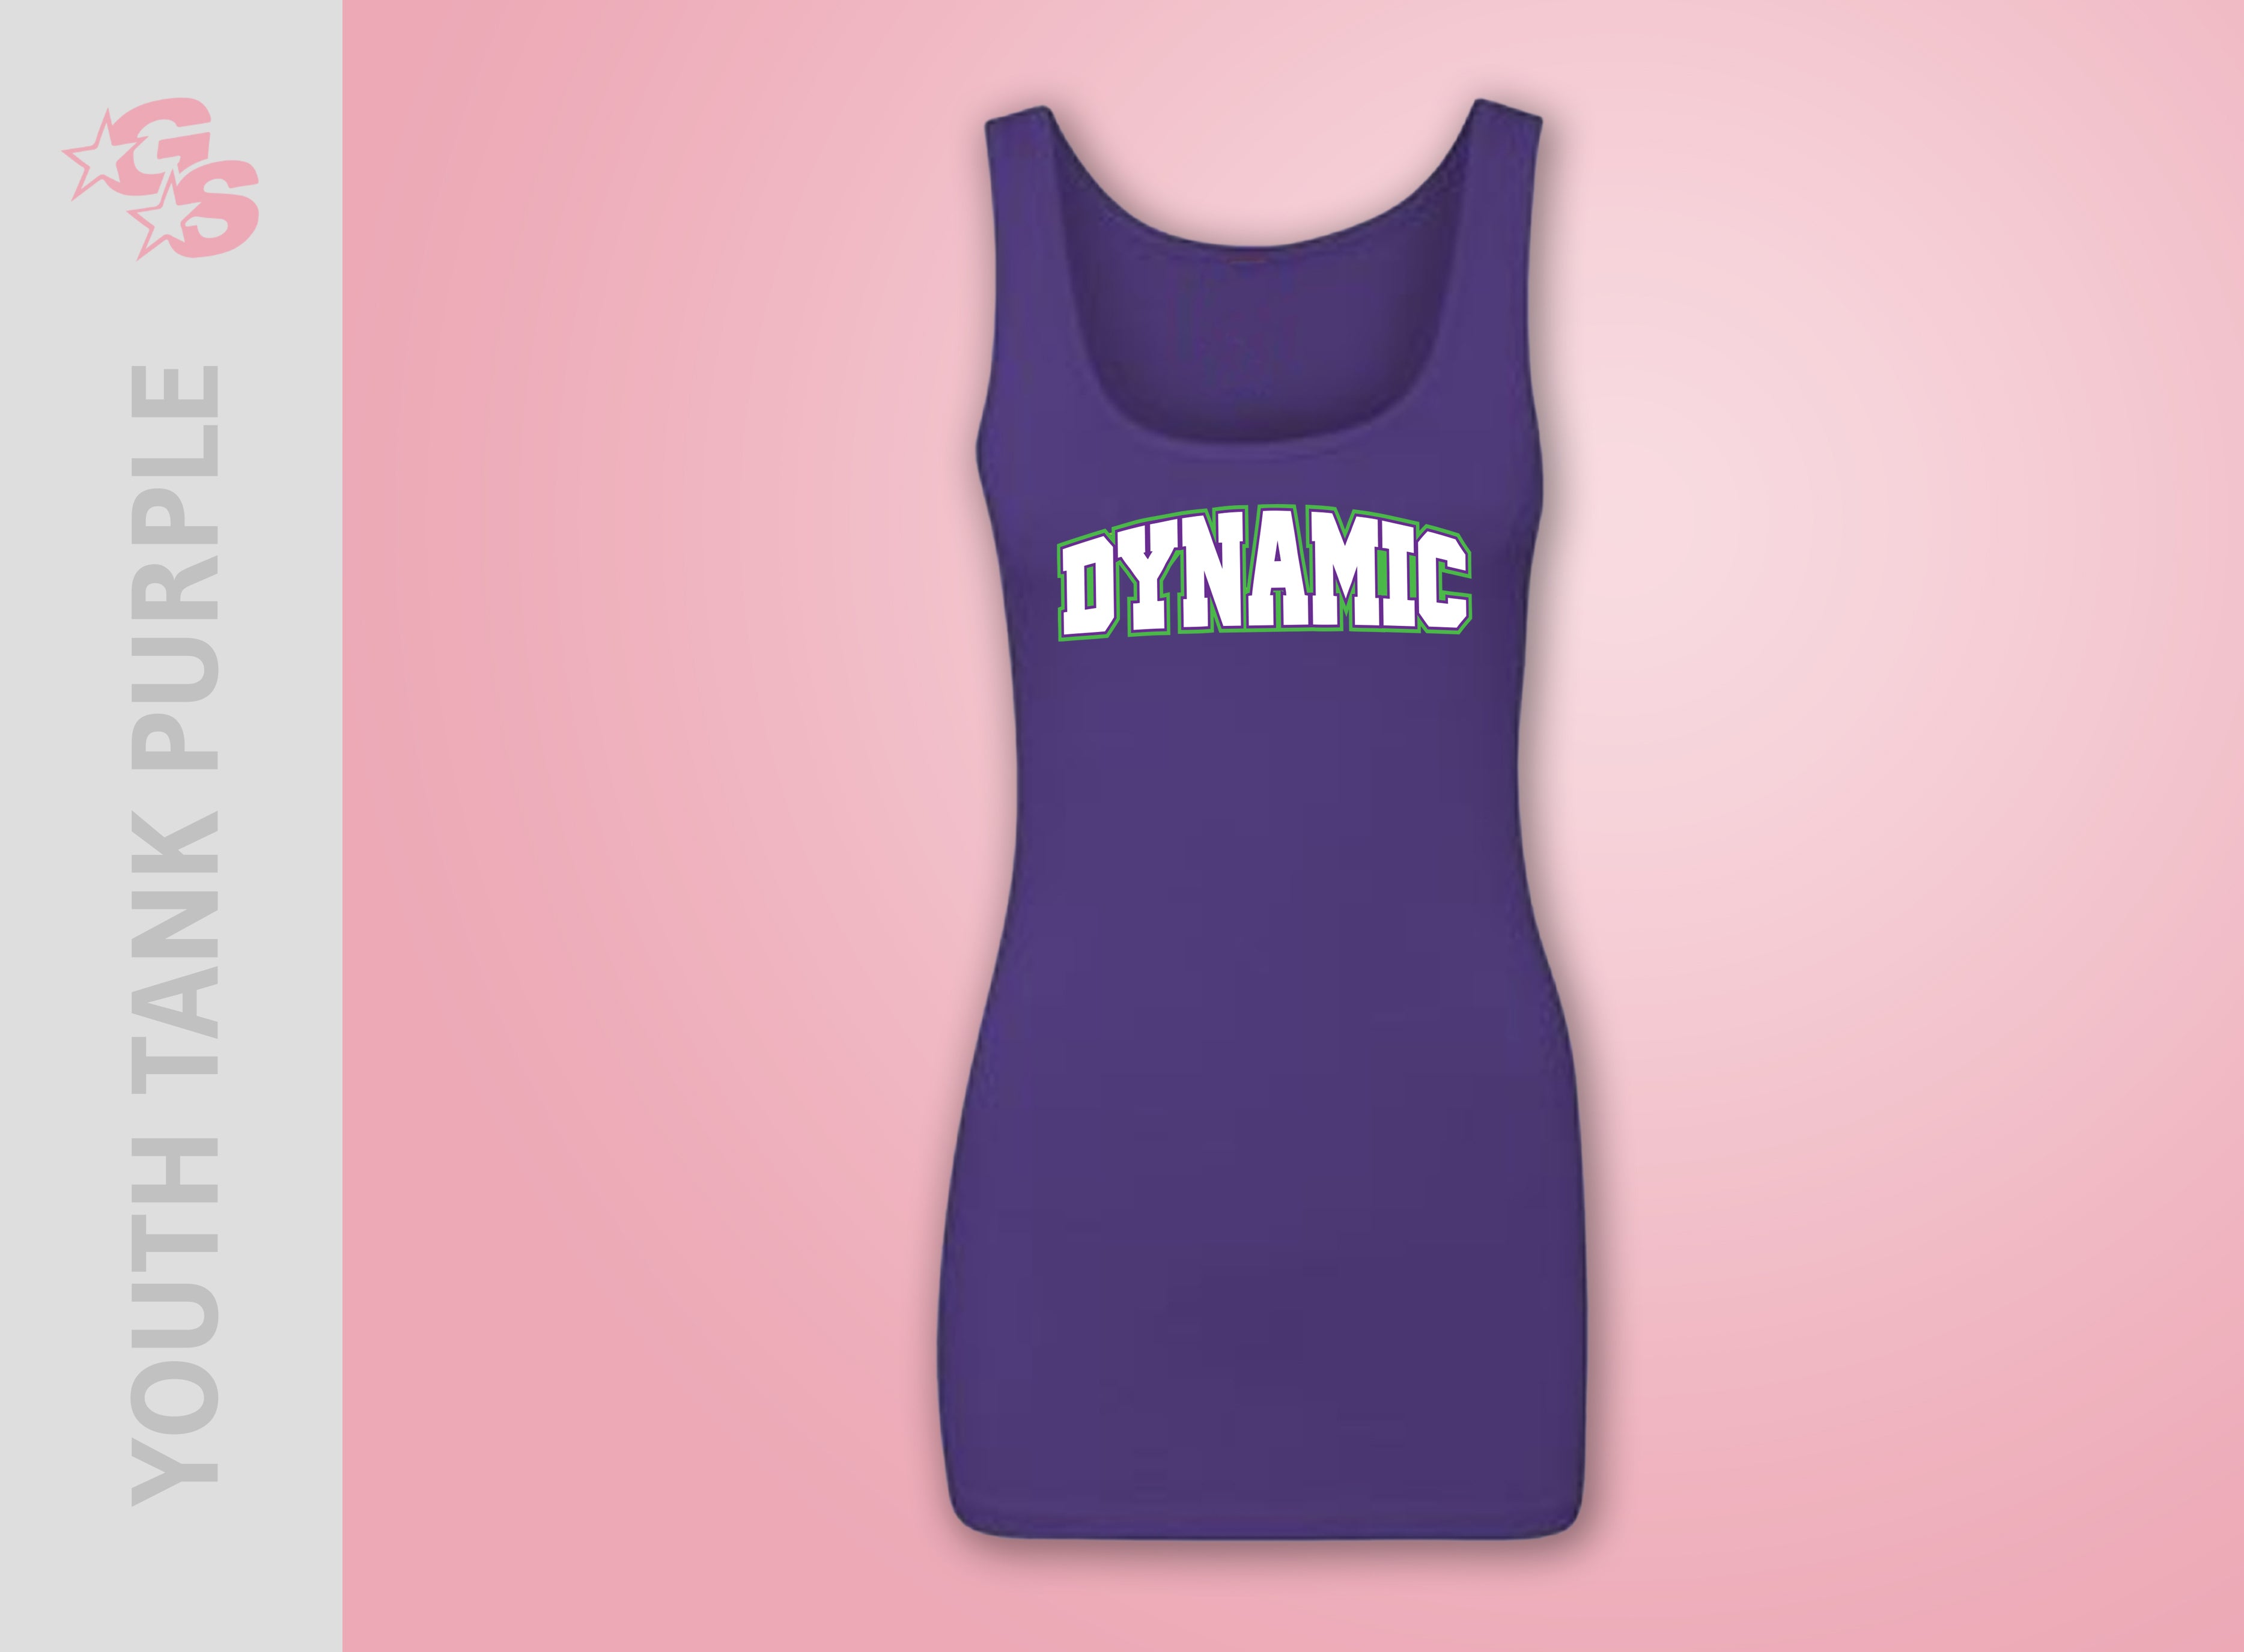 Dynamic Competitive Cheer Purple Tank Female Fit with Vinyl Logo